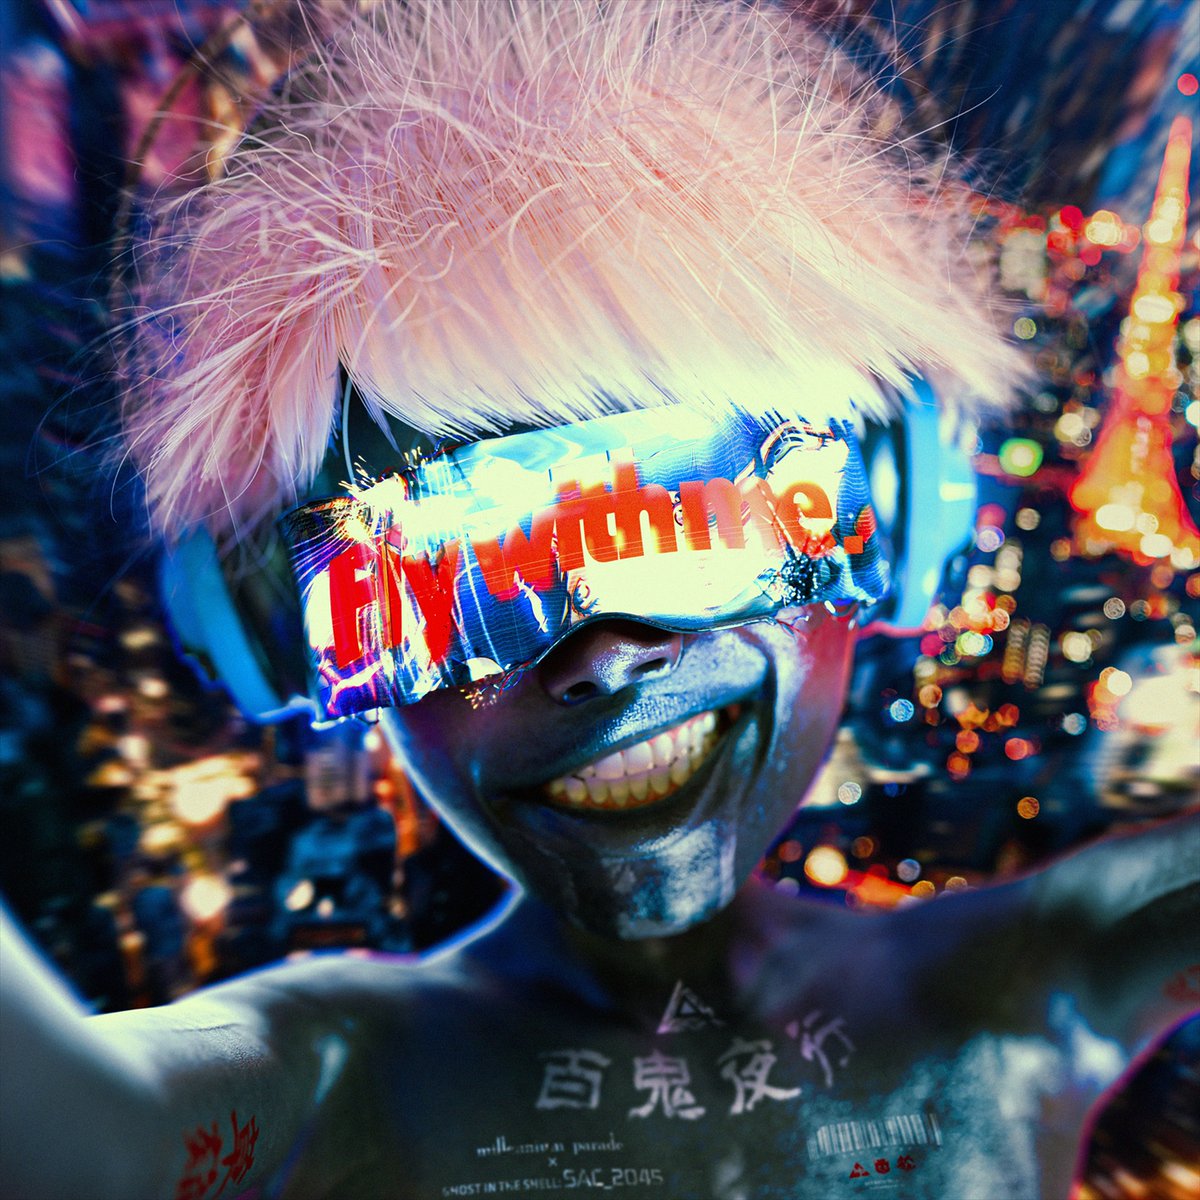 『millennium parade×ghost in the shell: SAC_2045 - Fly with me』収録の『Fly with me』ジャケット